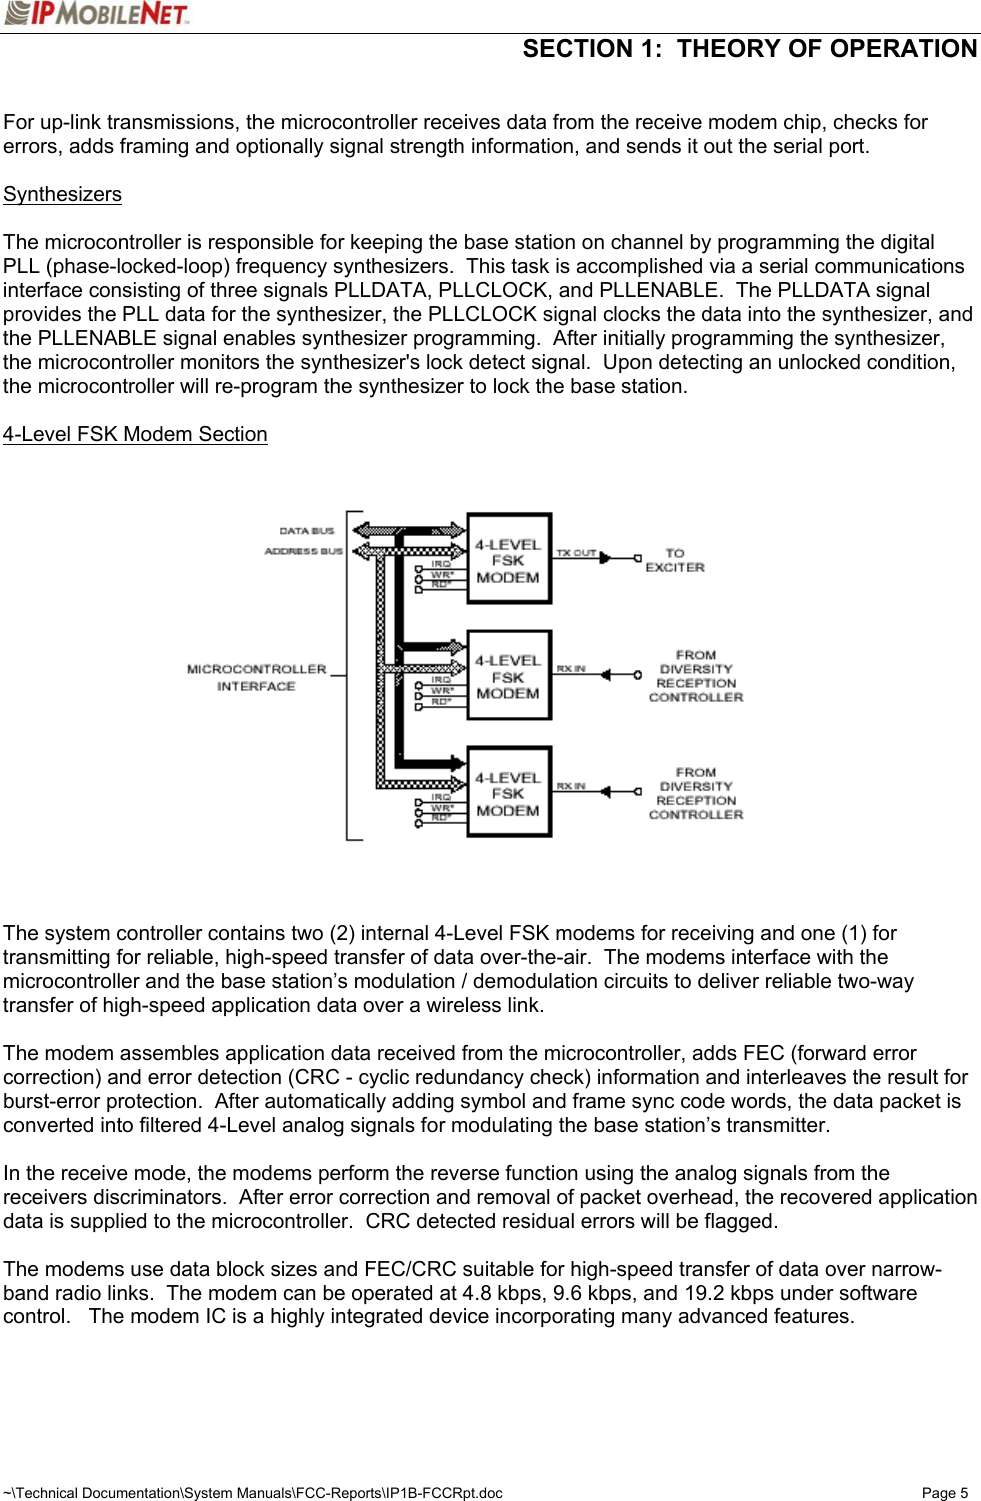  SECTION 1:  THEORY OF OPERATION  ~\Technical Documentation\System Manuals\FCC-Reports\IP1B-FCCRpt.doc  Page 5  For up-link transmissions, the microcontroller receives data from the receive modem chip, checks for errors, adds framing and optionally signal strength information, and sends it out the serial port.  Synthesizers  The microcontroller is responsible for keeping the base station on channel by programming the digital PLL (phase-locked-loop) frequency synthesizers.  This task is accomplished via a serial communications interface consisting of three signals PLLDATA, PLLCLOCK, and PLLENABLE.  The PLLDATA signal provides the PLL data for the synthesizer, the PLLCLOCK signal clocks the data into the synthesizer, and the PLLENABLE signal enables synthesizer programming.  After initially programming the synthesizer, the microcontroller monitors the synthesizer&apos;s lock detect signal.  Upon detecting an unlocked condition, the microcontroller will re-program the synthesizer to lock the base station.  4-Level FSK Modem Section      The system controller contains two (2) internal 4-Level FSK modems for receiving and one (1) for transmitting for reliable, high-speed transfer of data over-the-air.  The modems interface with the microcontroller and the base station’s modulation / demodulation circuits to deliver reliable two-way transfer of high-speed application data over a wireless link.  The modem assembles application data received from the microcontroller, adds FEC (forward error correction) and error detection (CRC - cyclic redundancy check) information and interleaves the result for burst-error protection.  After automatically adding symbol and frame sync code words, the data packet is converted into filtered 4-Level analog signals for modulating the base station’s transmitter.  In the receive mode, the modems perform the reverse function using the analog signals from the receivers discriminators.  After error correction and removal of packet overhead, the recovered application data is supplied to the microcontroller.  CRC detected residual errors will be flagged.  The modems use data block sizes and FEC/CRC suitable for high-speed transfer of data over narrow-band radio links.  The modem can be operated at 4.8 kbps, 9.6 kbps, and 19.2 kbps under software control.   The modem IC is a highly integrated device incorporating many advanced features.   